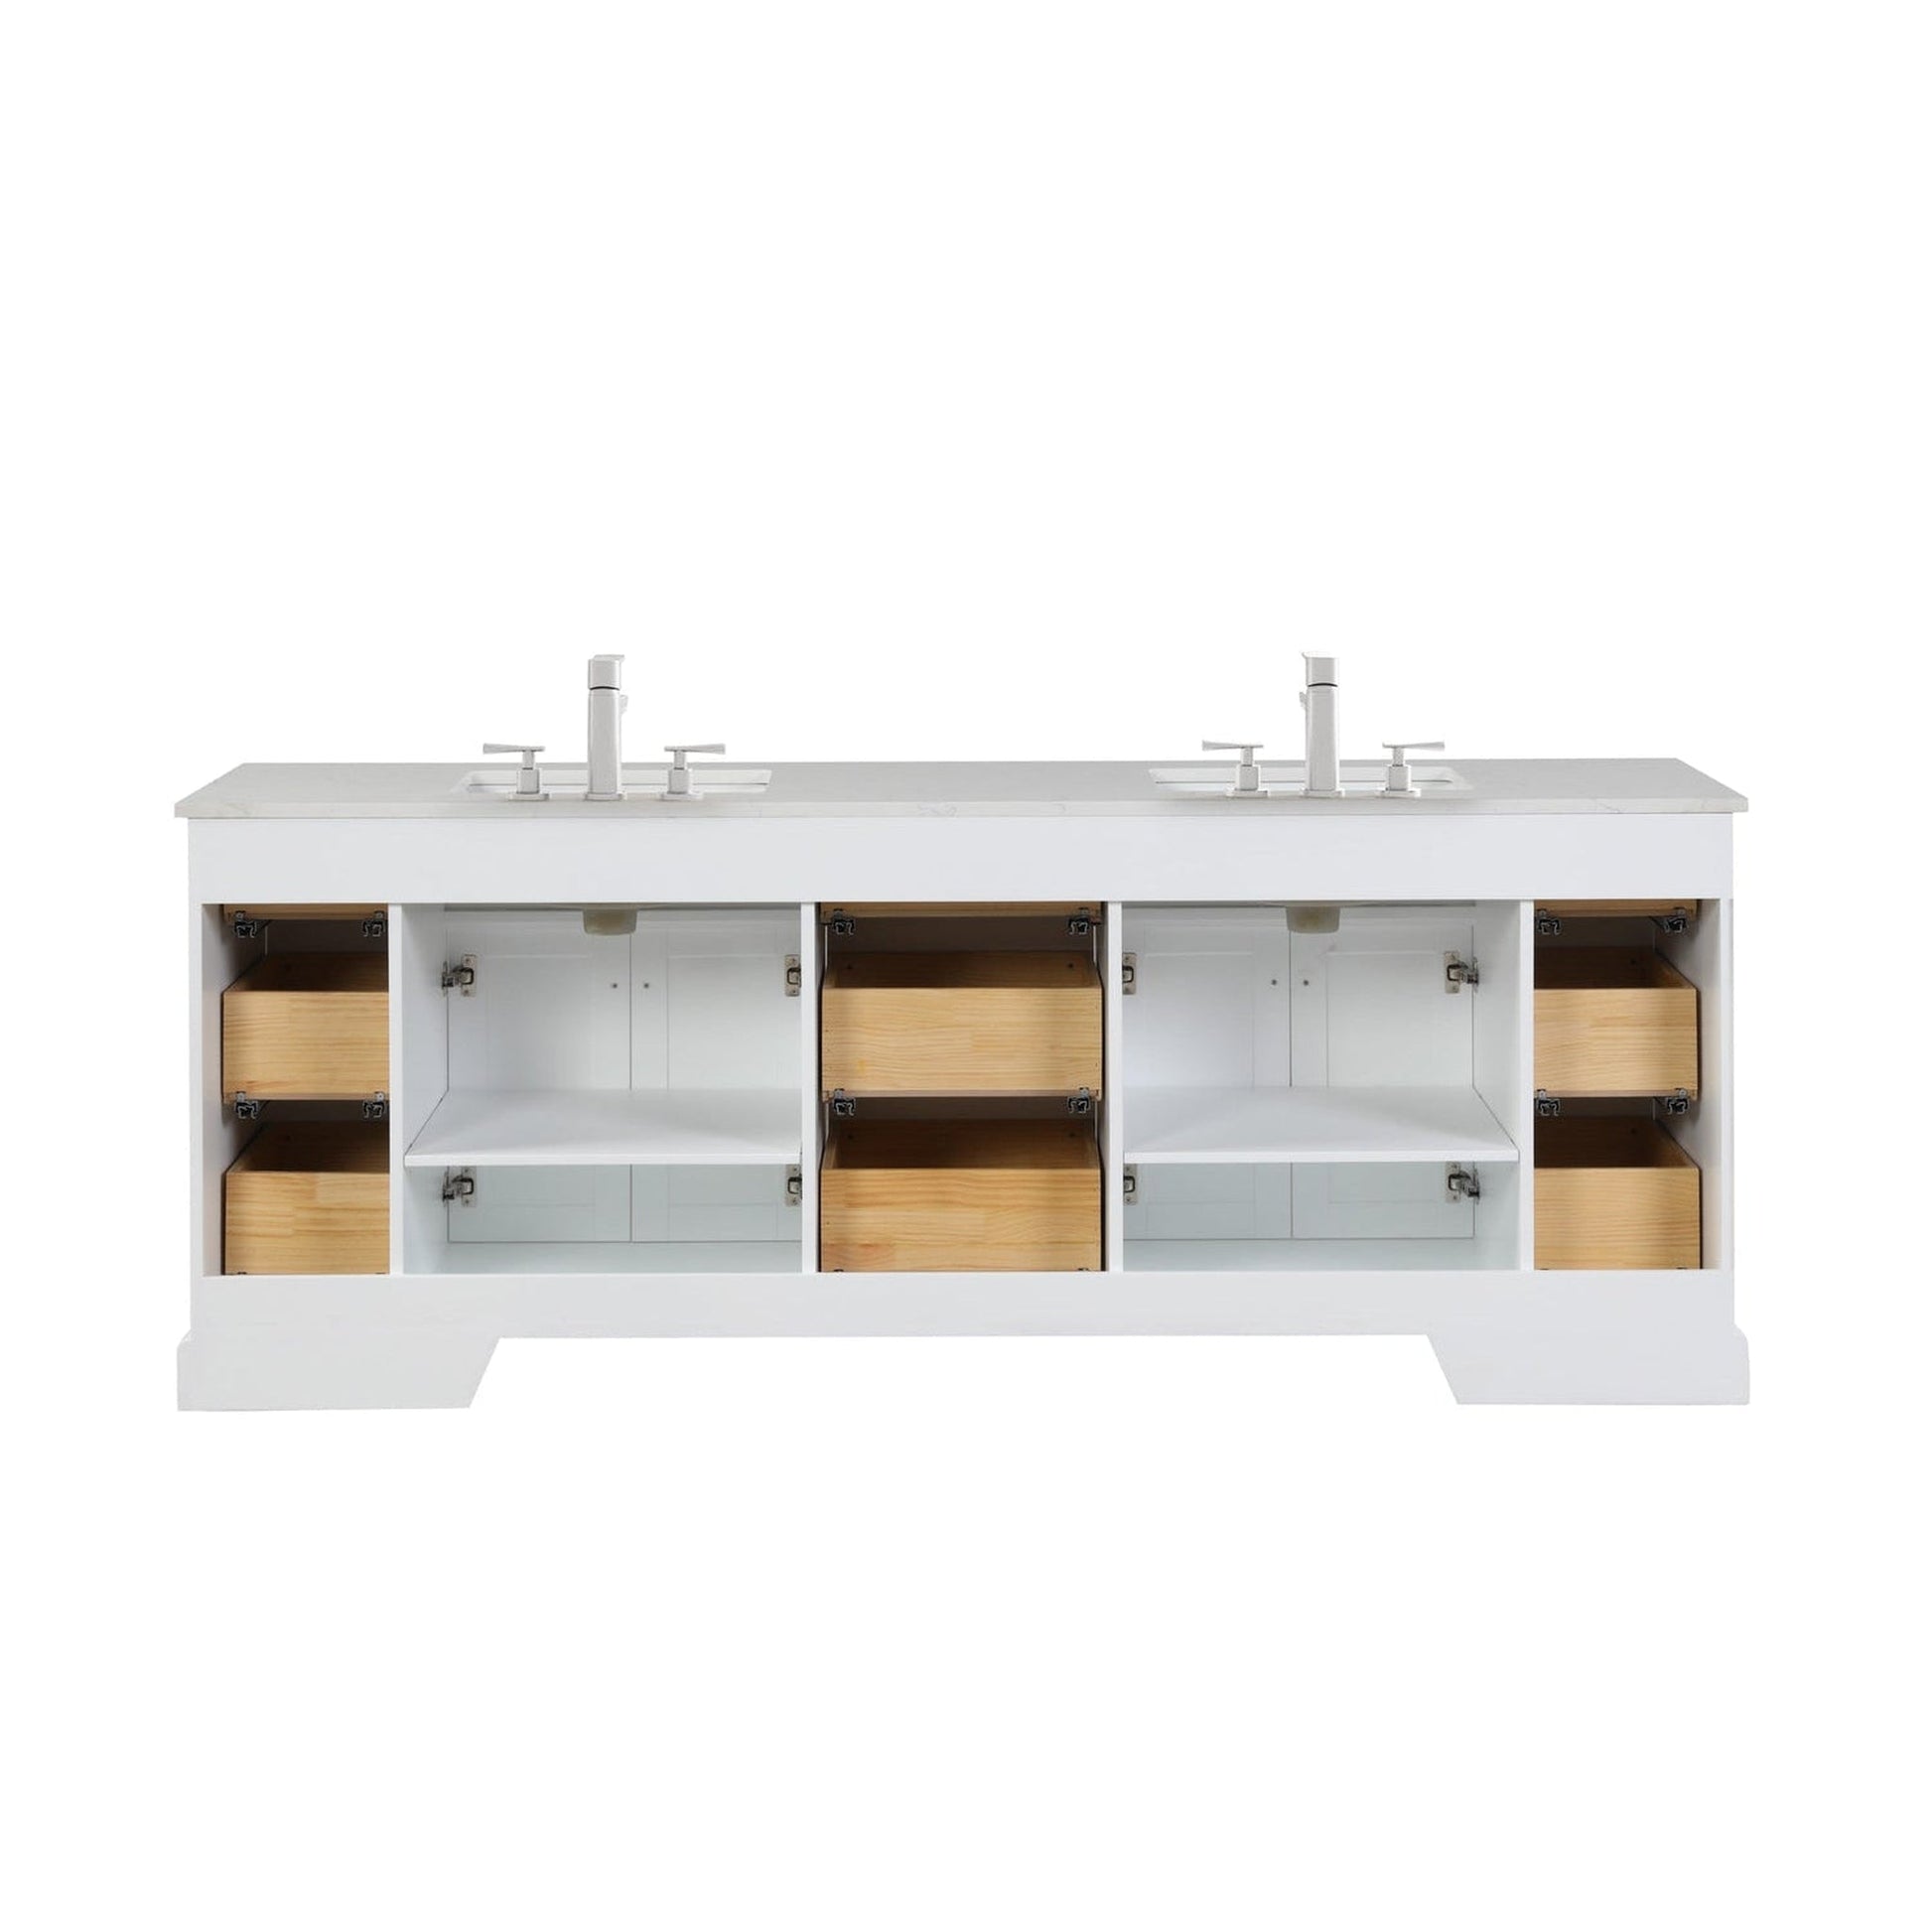 Eviva Epic 84" x 34" White Freestanding Bathroom Vanity With Brushed Nickel Hardware and Quartz Countertop With Double Undermount Sink